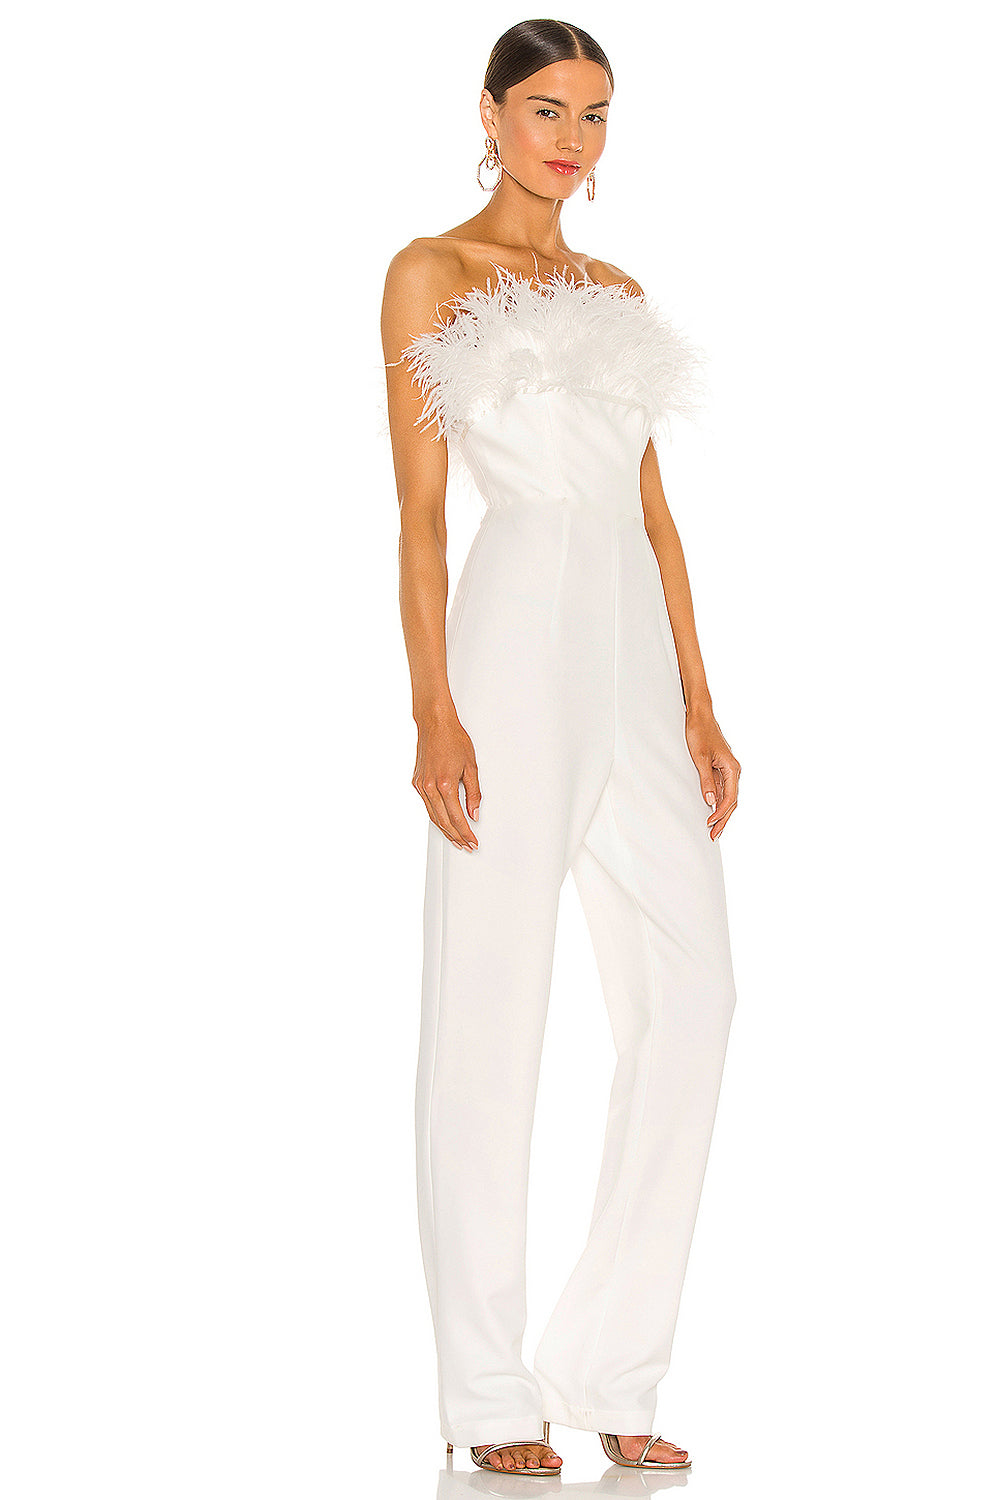 White Feathers Jumpsuits Off Shoulder Full Pants - Chicida